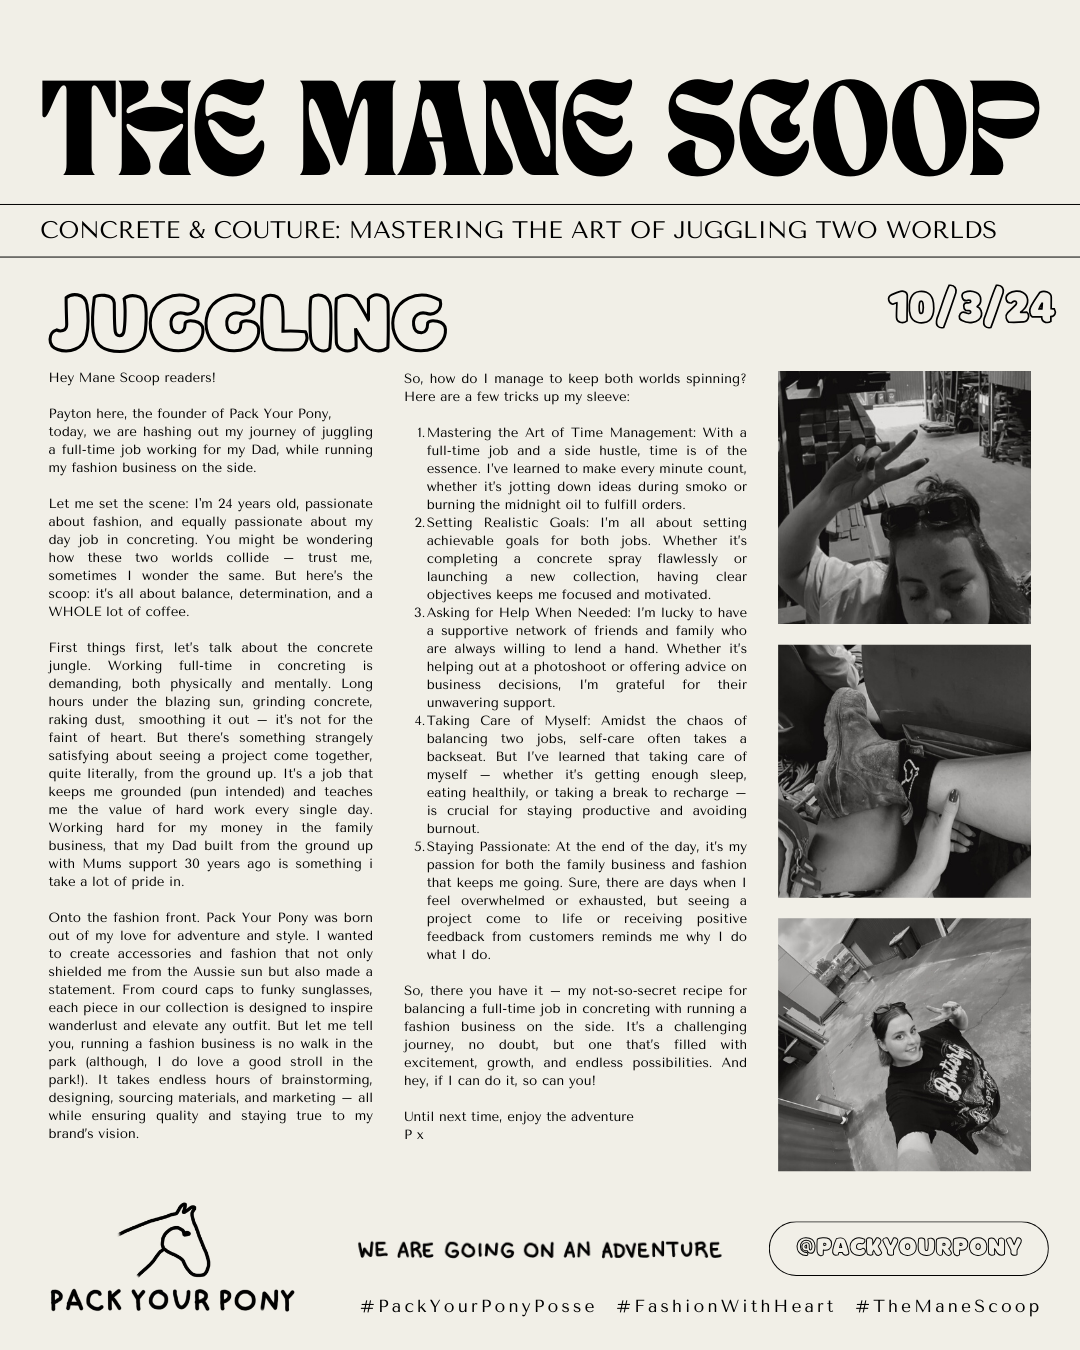 Issue 10 - Juggling